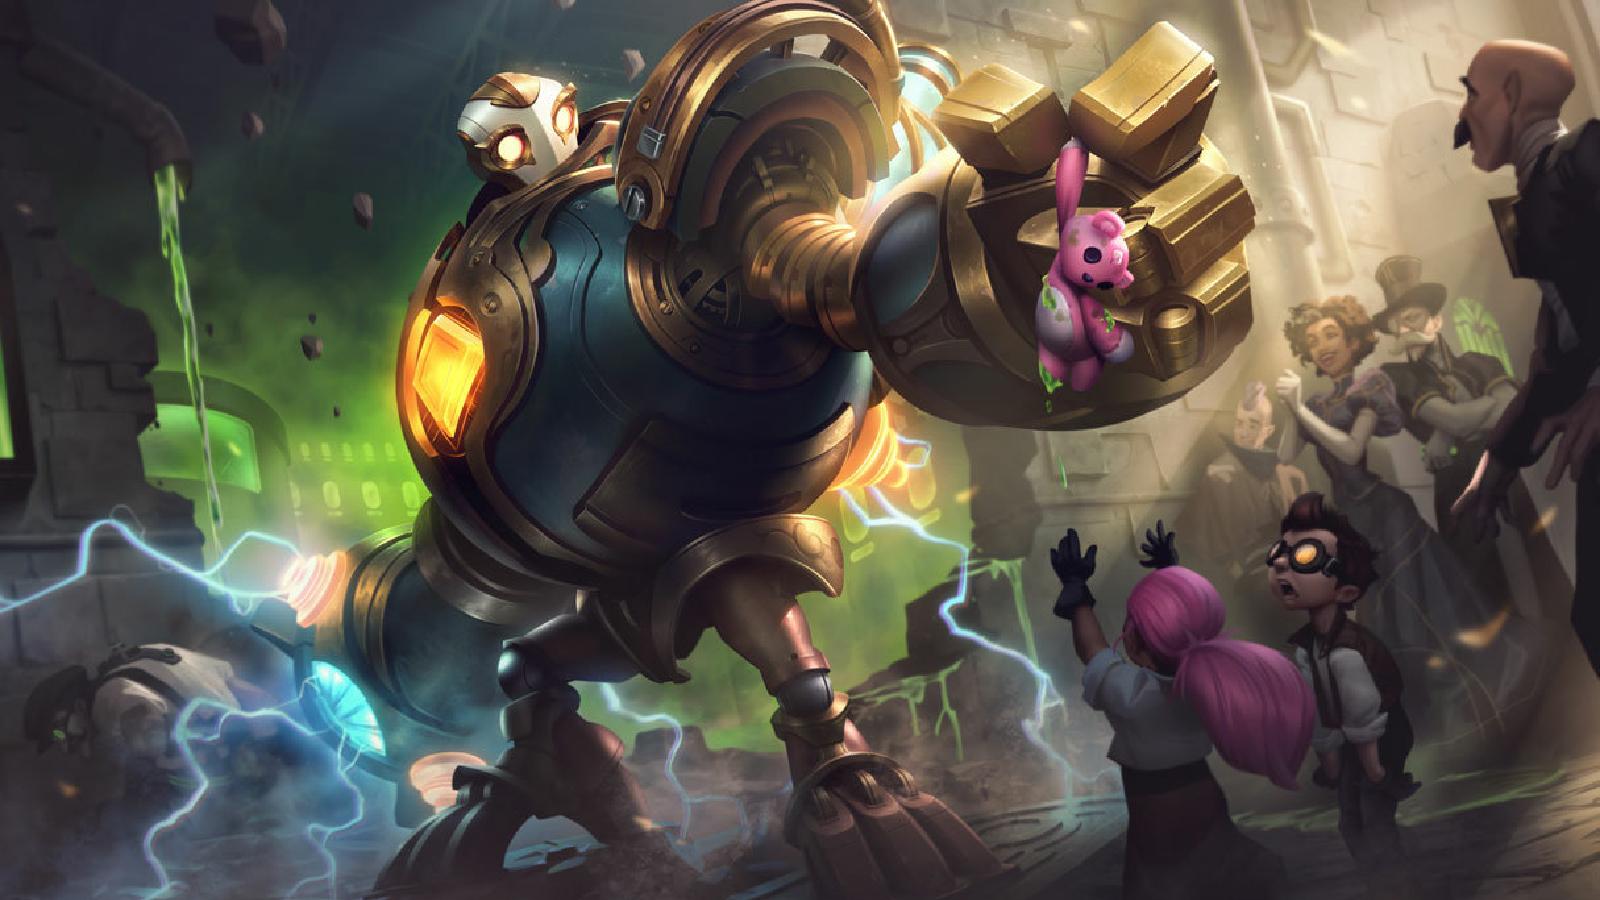 Download League of Legends Play & Earn Real Money